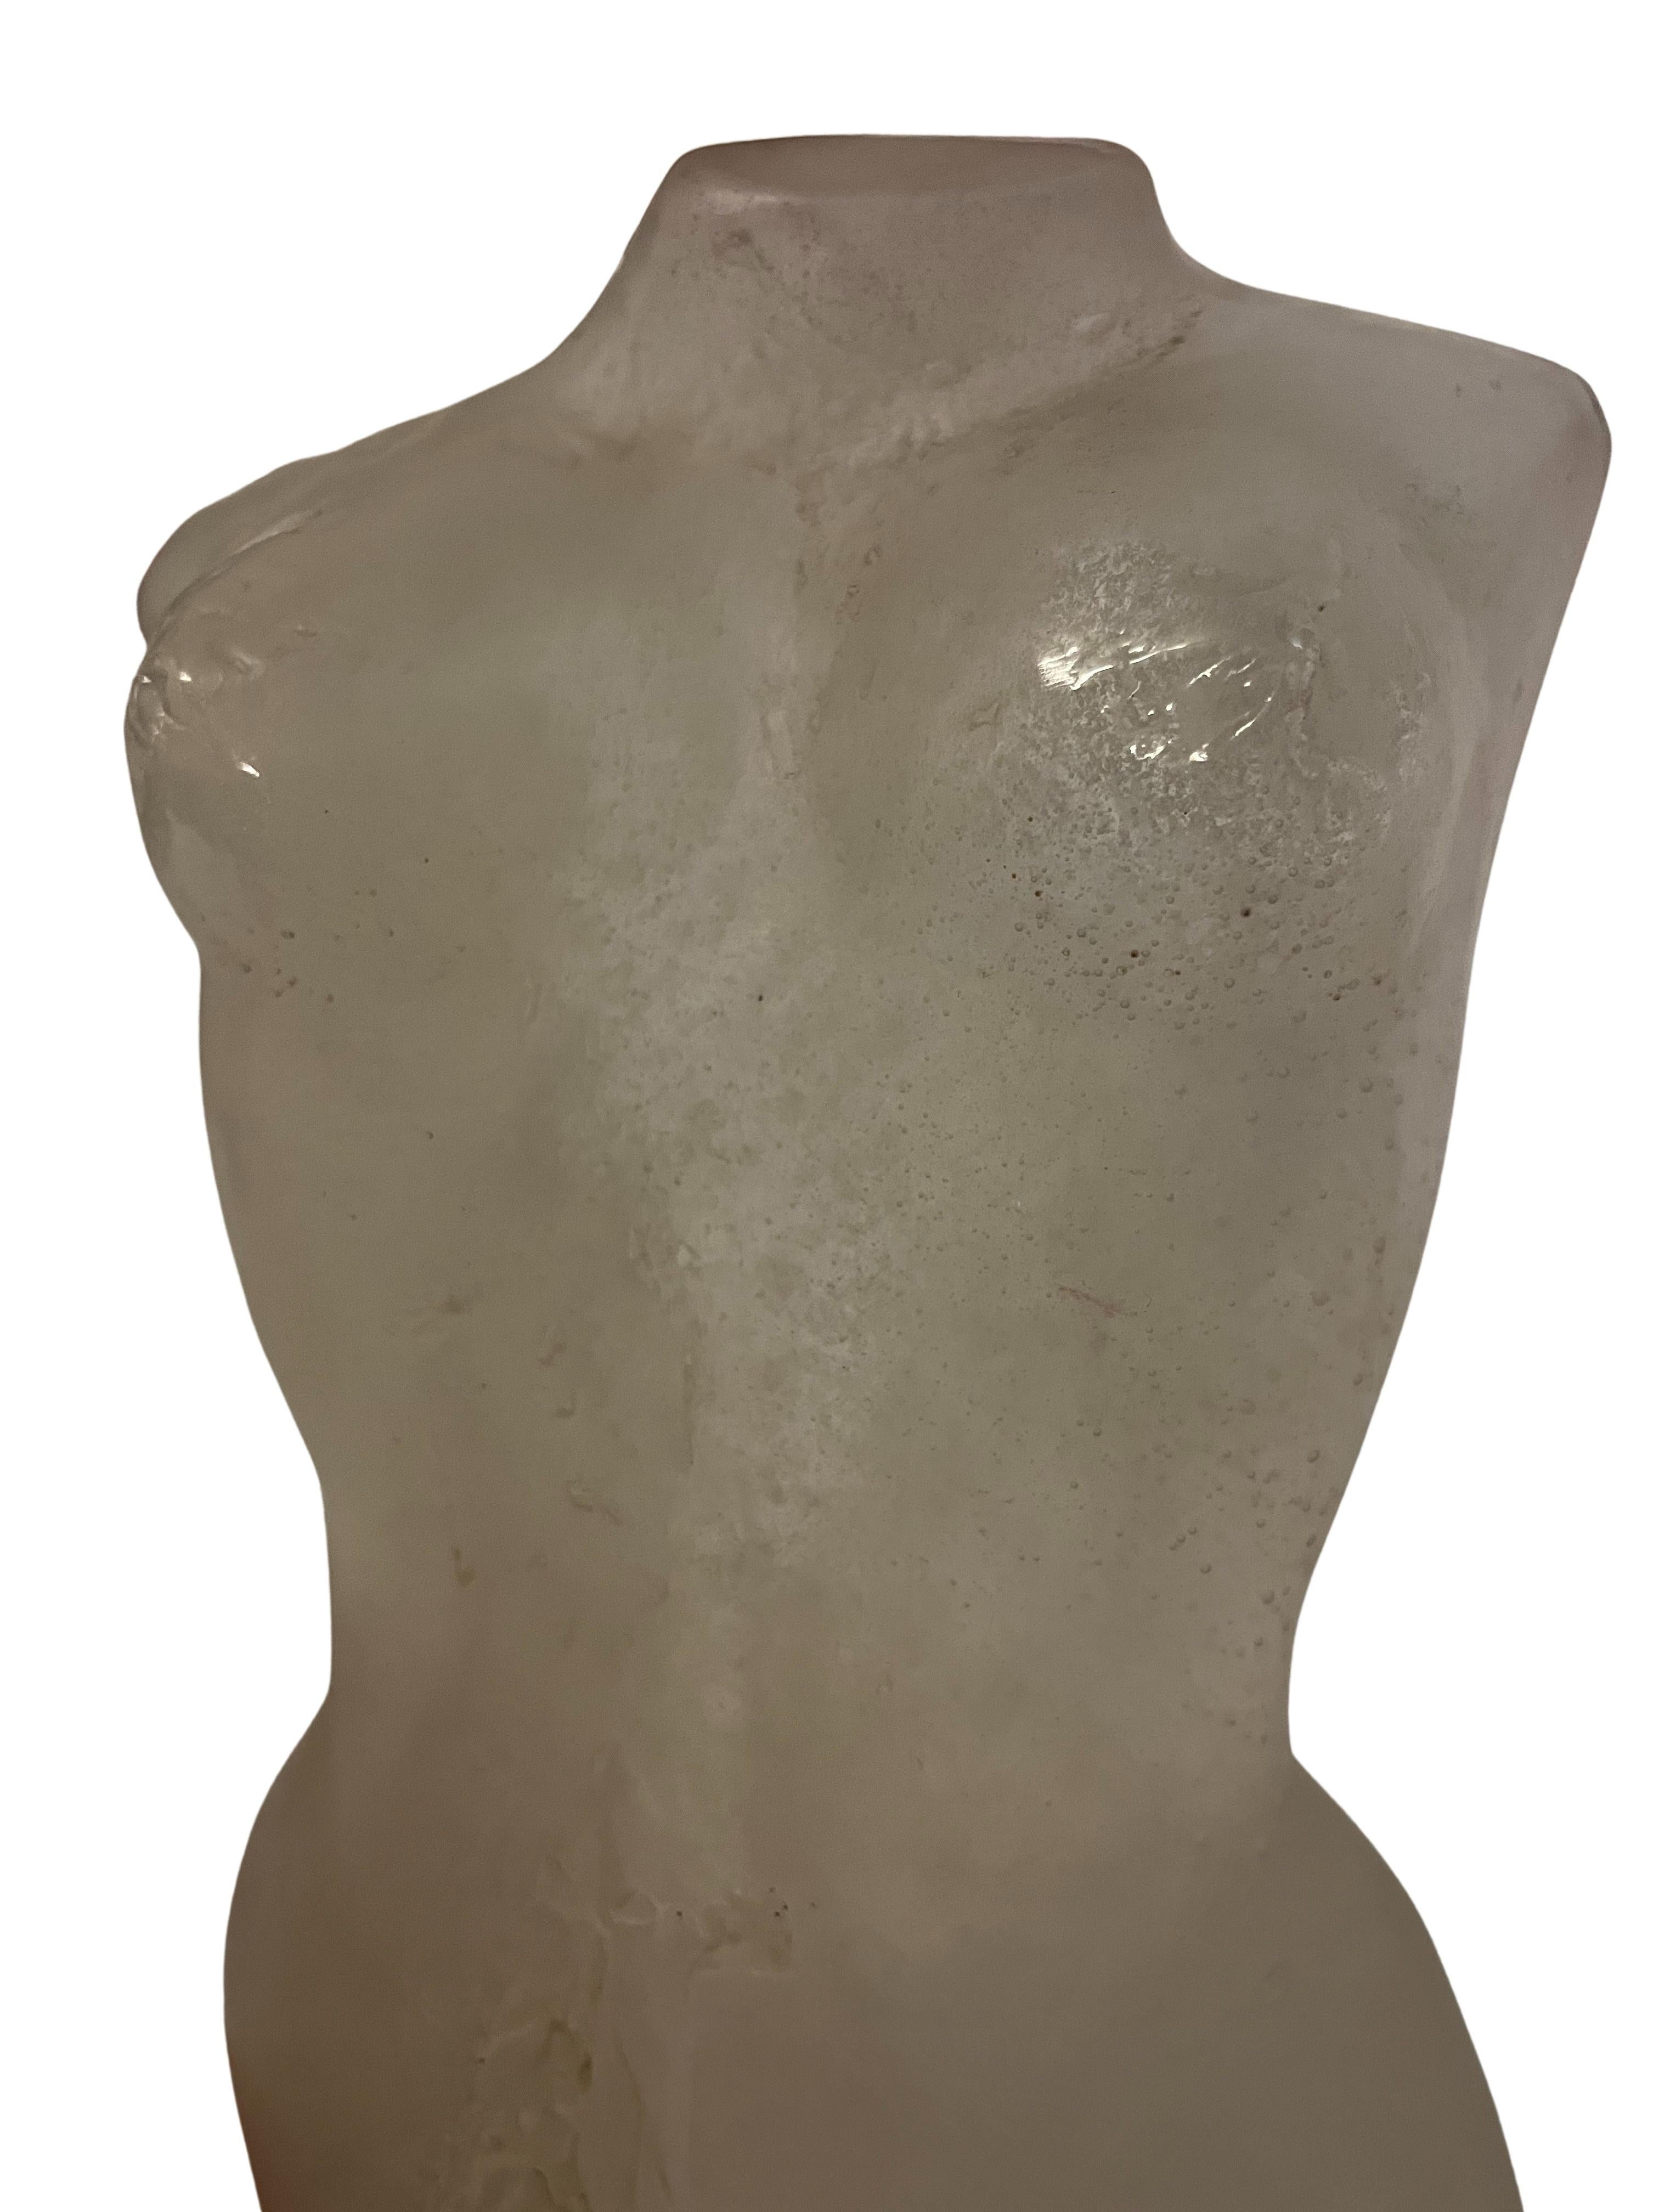 A rare woman's torso, called Eurydice, in white pat de verre, beautifully designed according to nature, by Maurice Legendre, from the well-known manufacturer Daum Nancy, France.

The object has a masterly form in a very appealing color - which fits